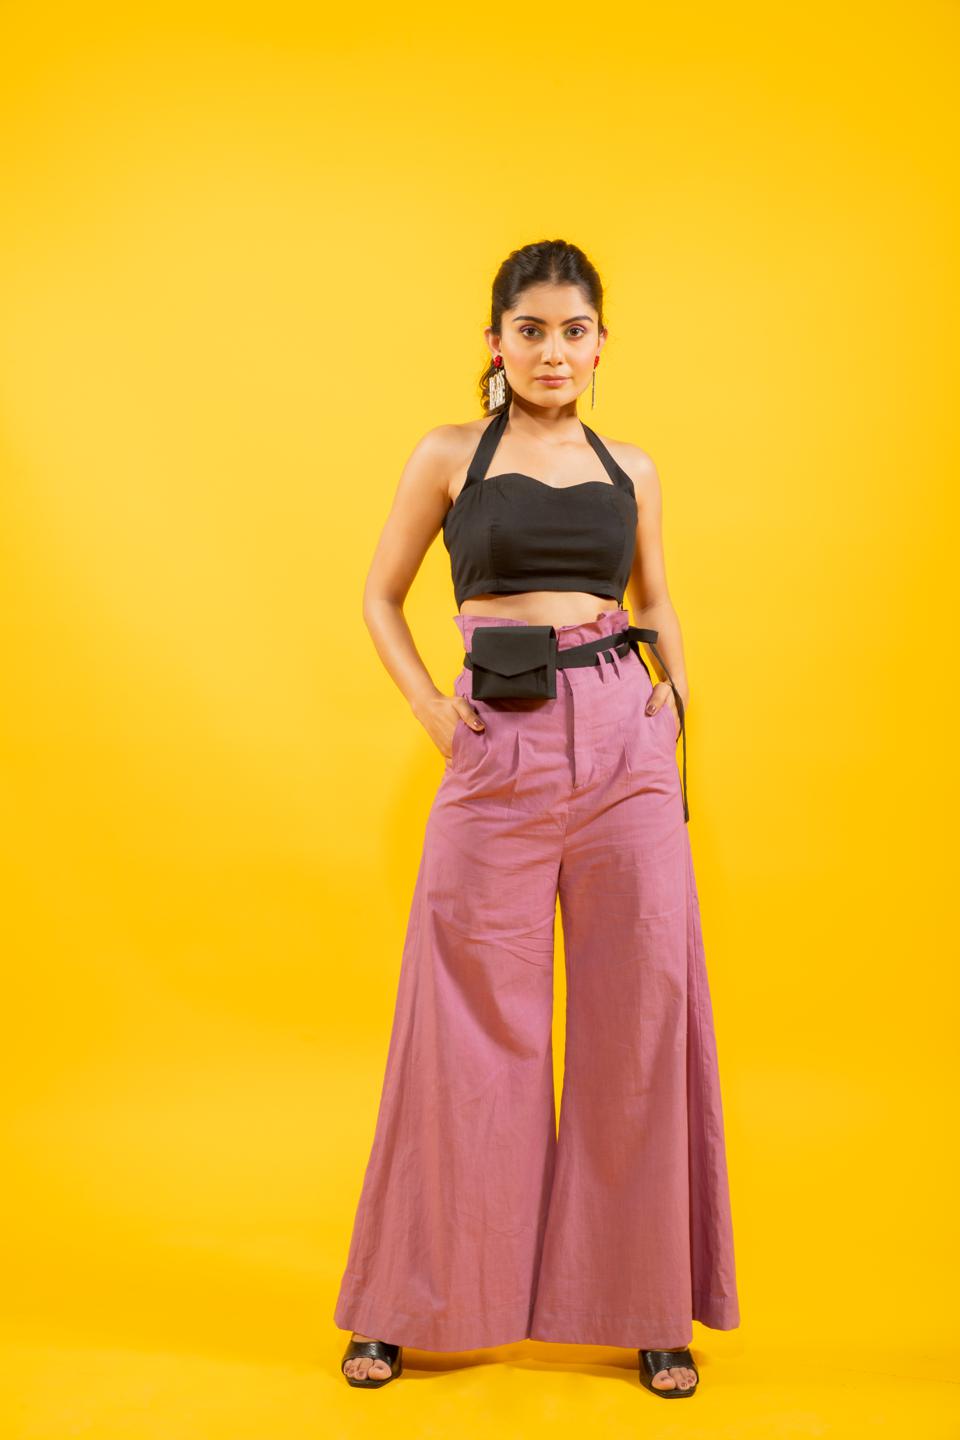 statement-black-halter-top-with-high-waisted-mauve-flared-pants-11740099BK, Women Clothing, Cotton Matching Set